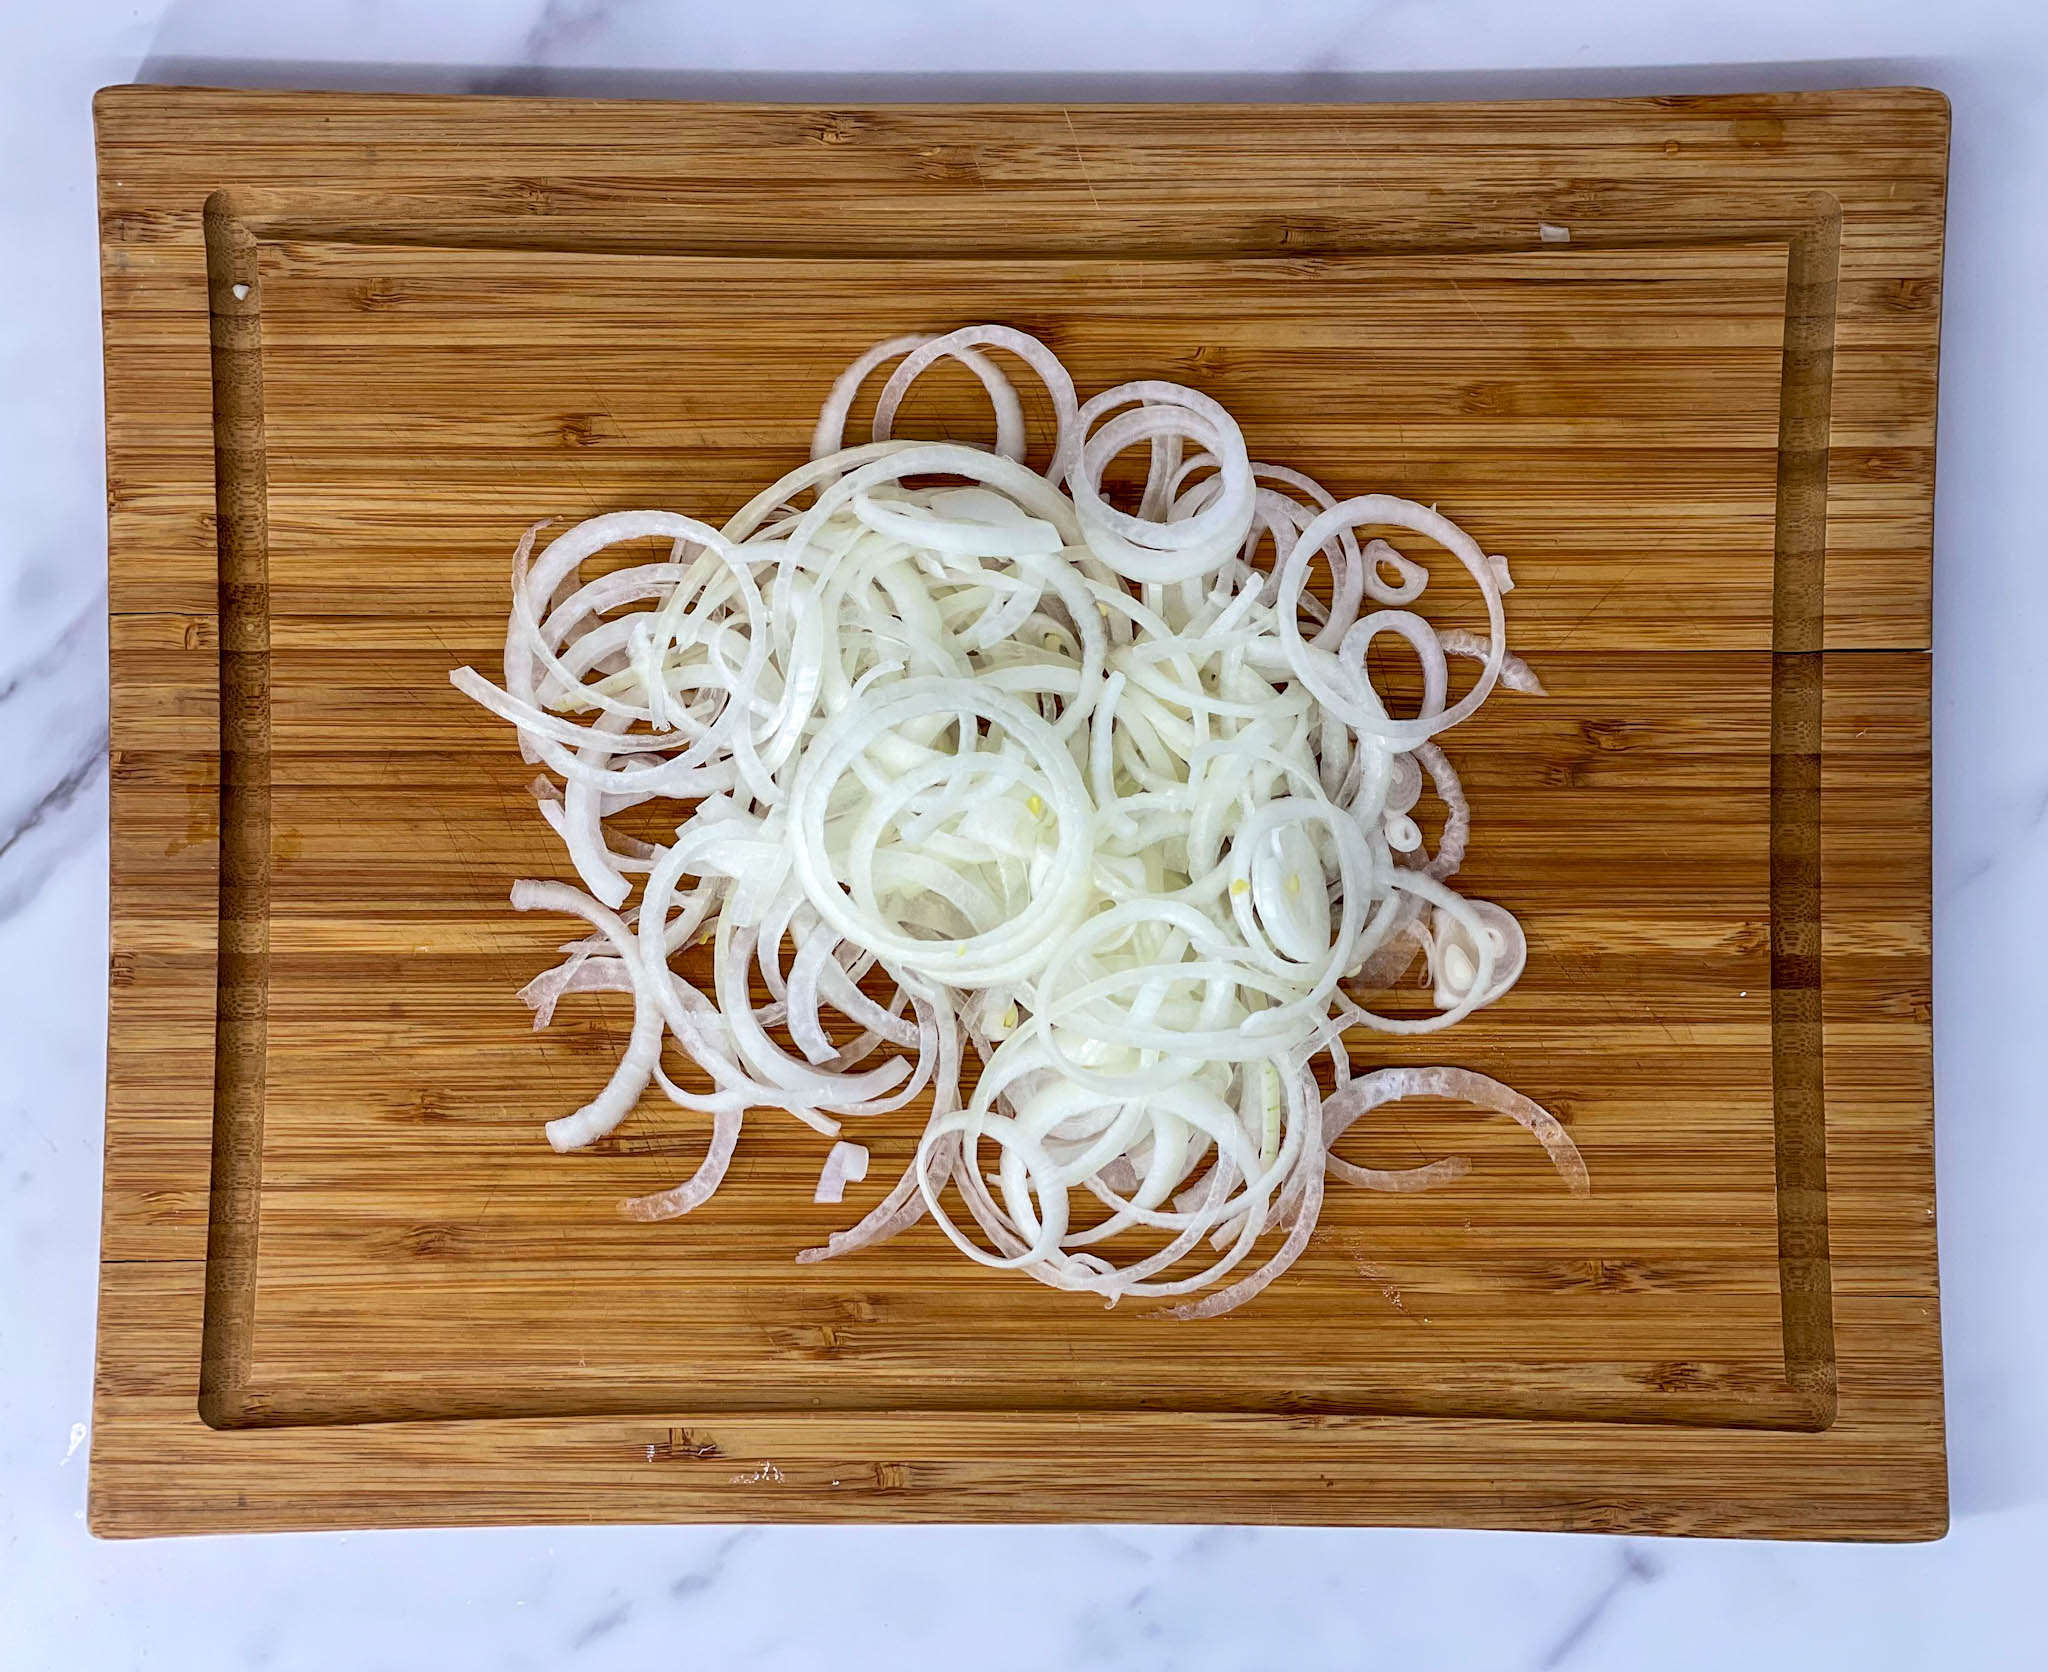 Thinly sliced onions on wooden cutting board with a white background.